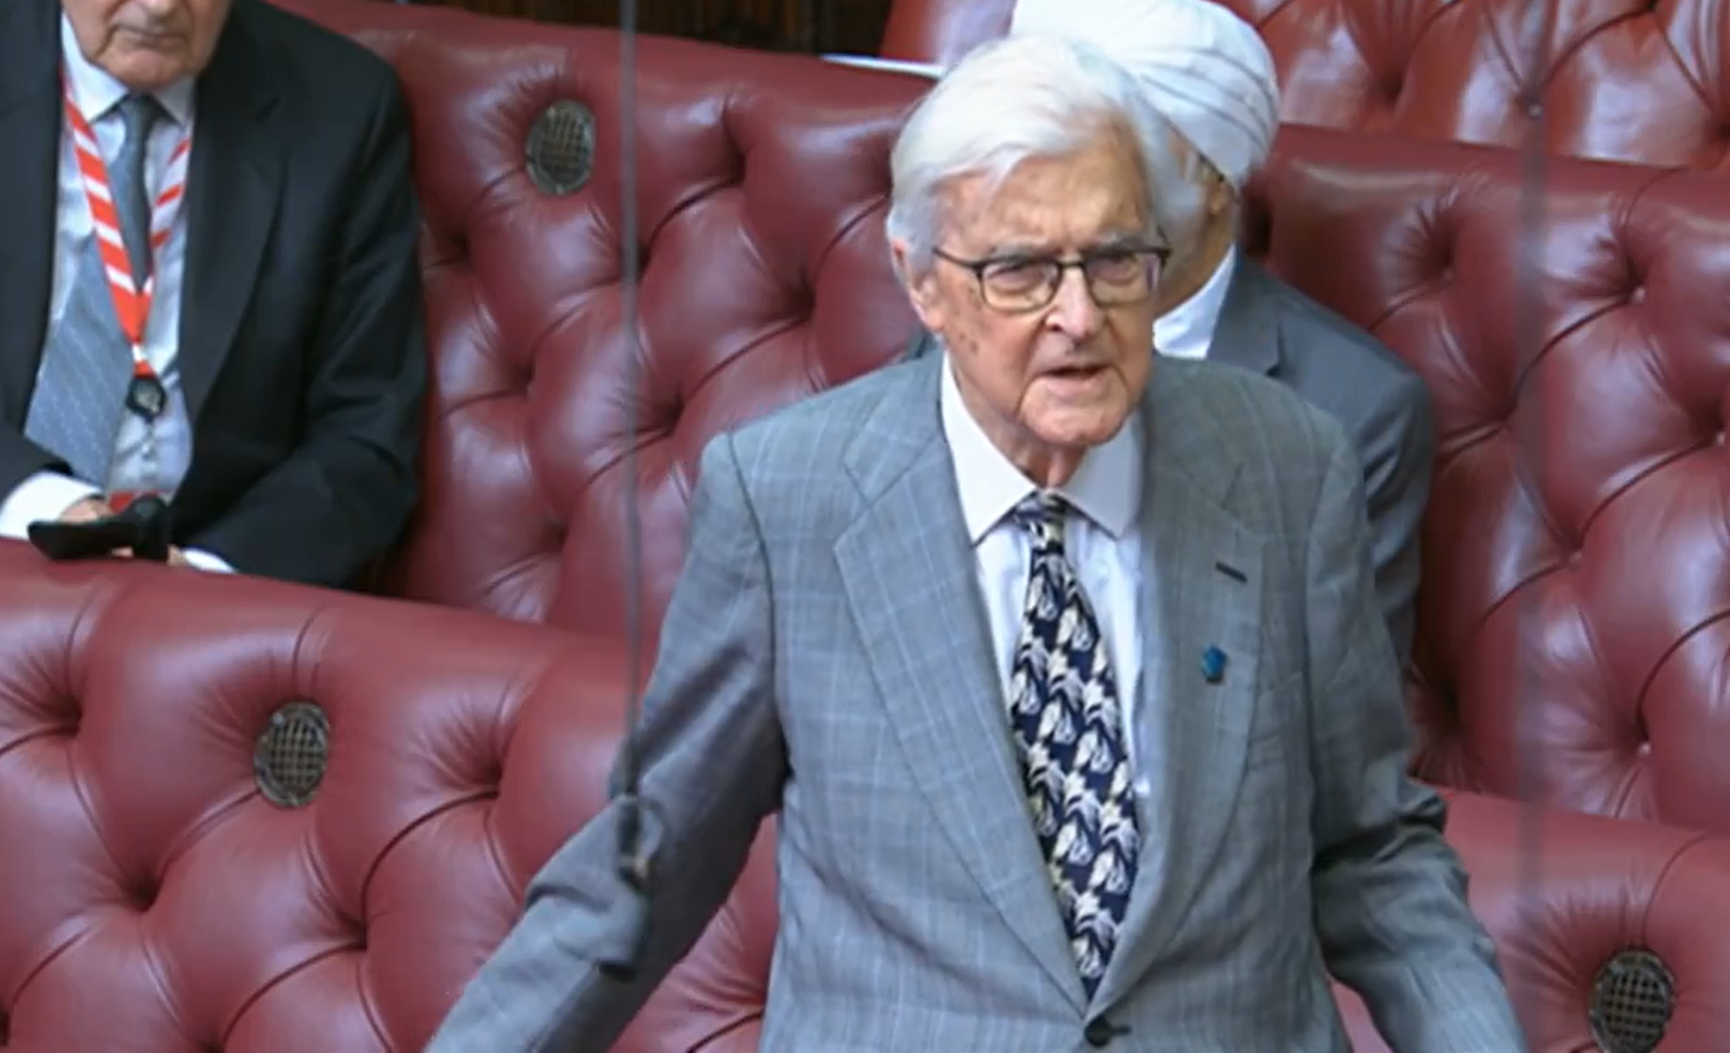 Lord Baker of Dorking speaks in the House of Lords chamber